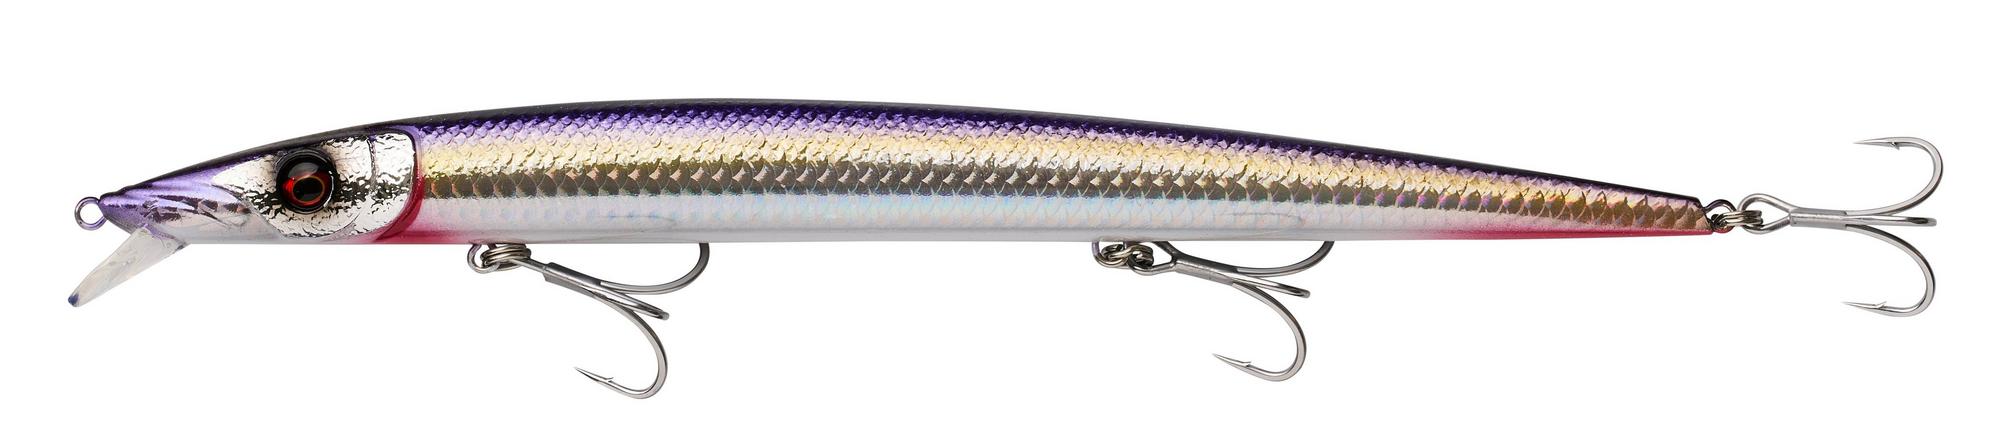 Savage Gear Barra Jerk Marine Fishing Lures 21cm (34g) - Gold Anchovy